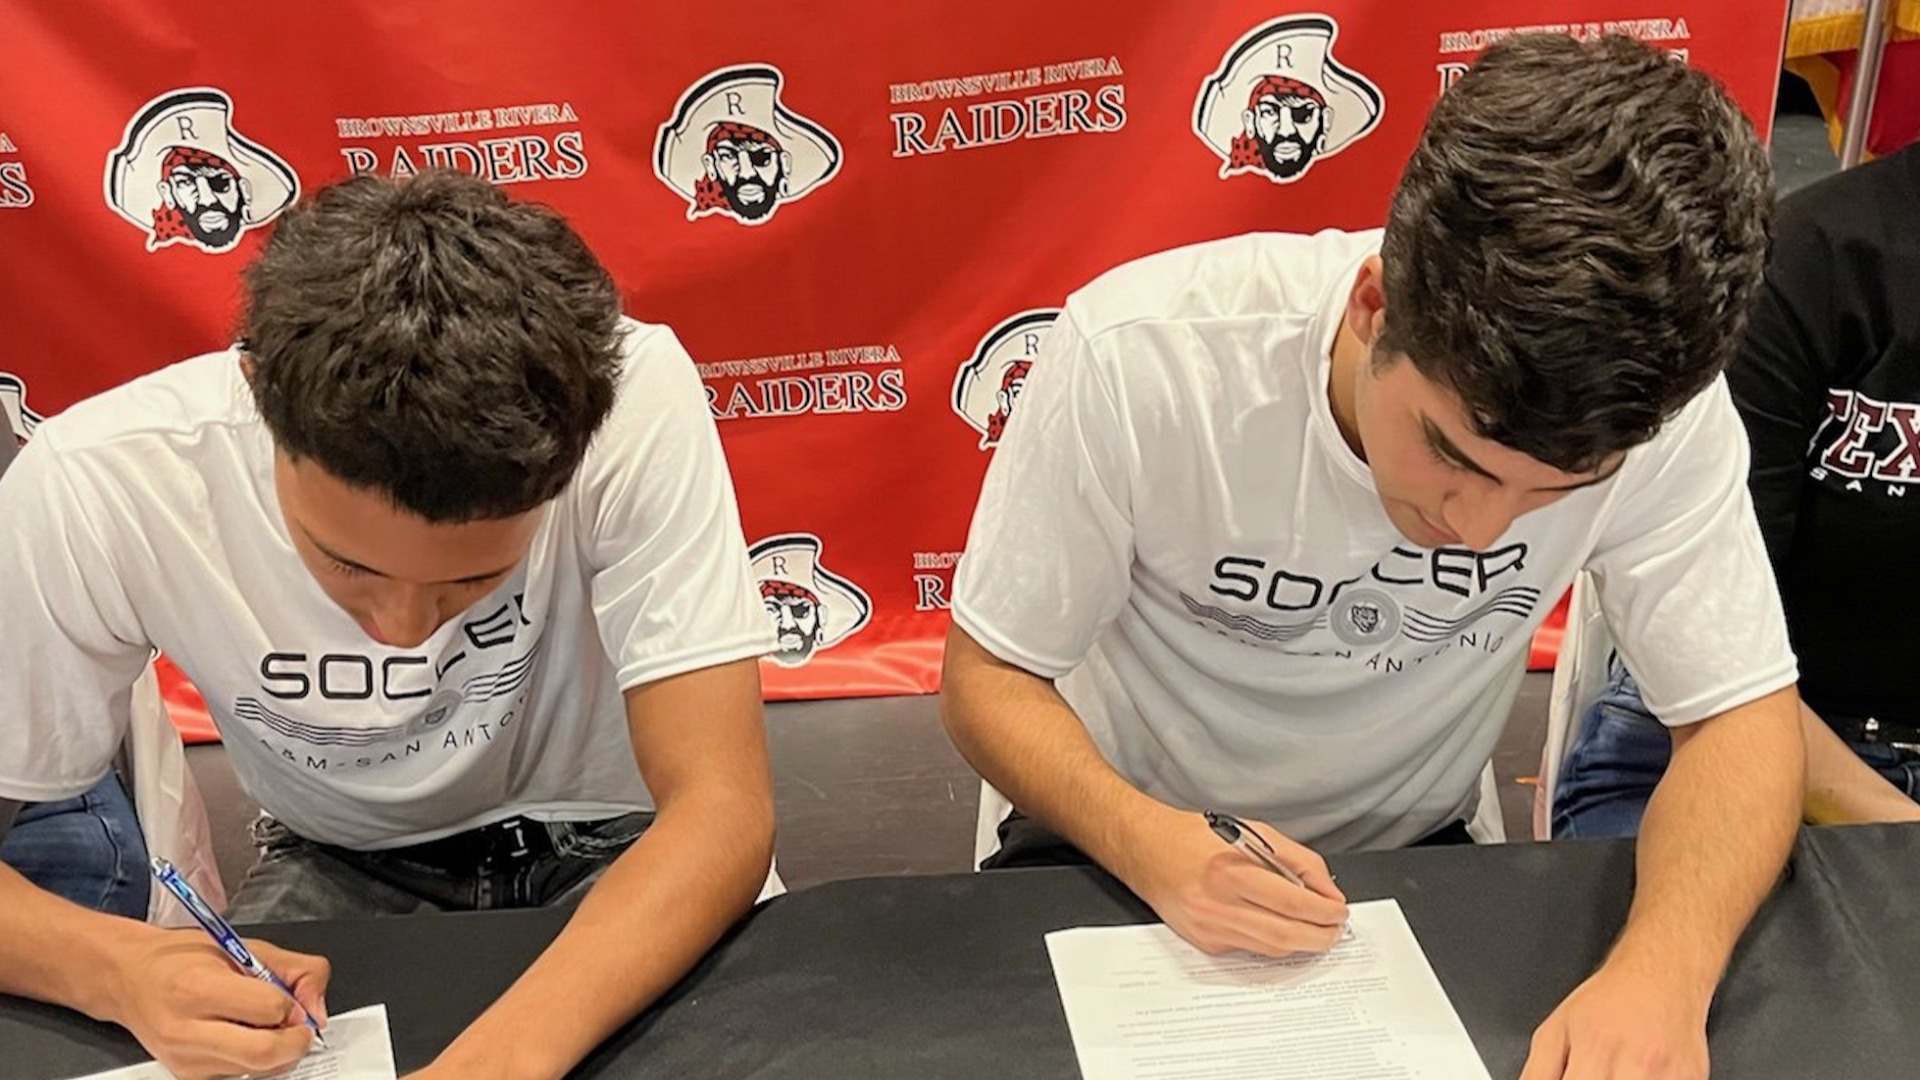 Slide 7 - BOYS SOCCER DUO MAKING A MOVE TO THE ALAMO CITY.